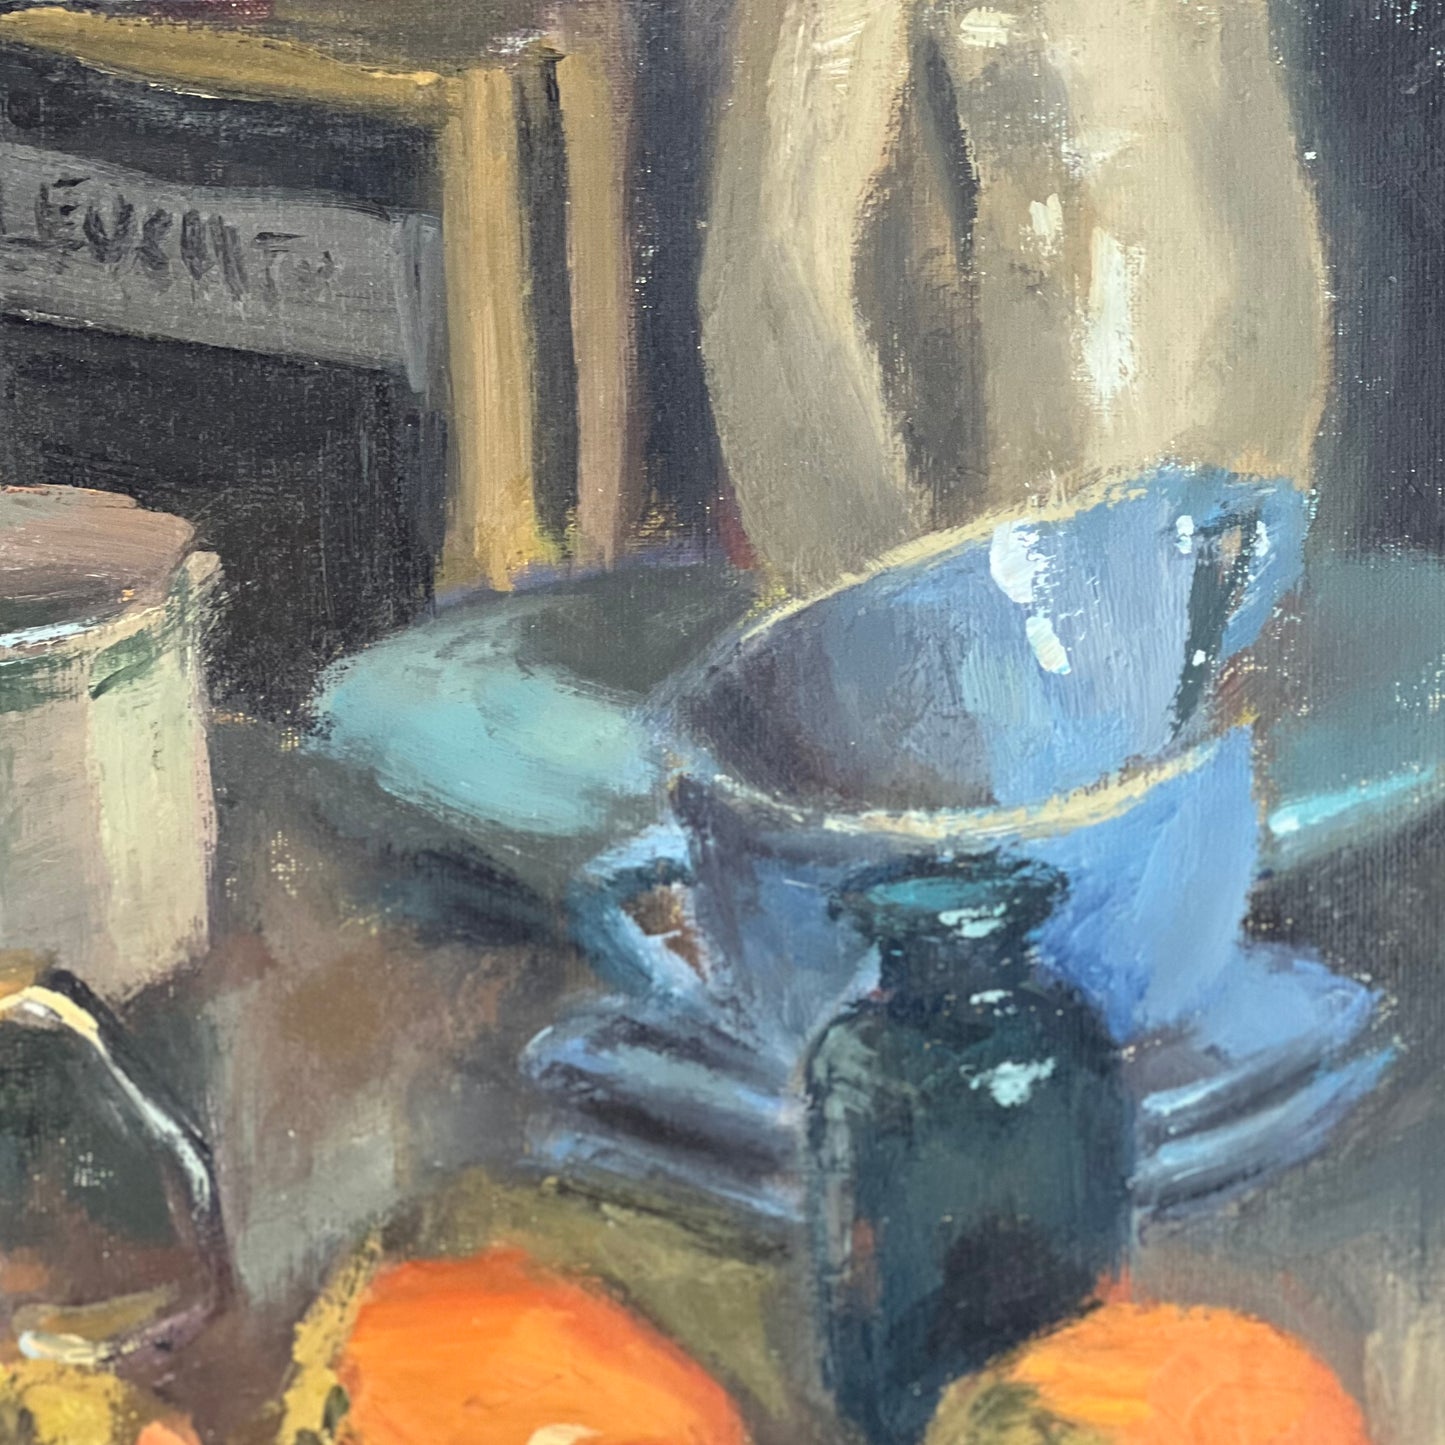 Large Still Life Painting - Everything but the kitchen sink!